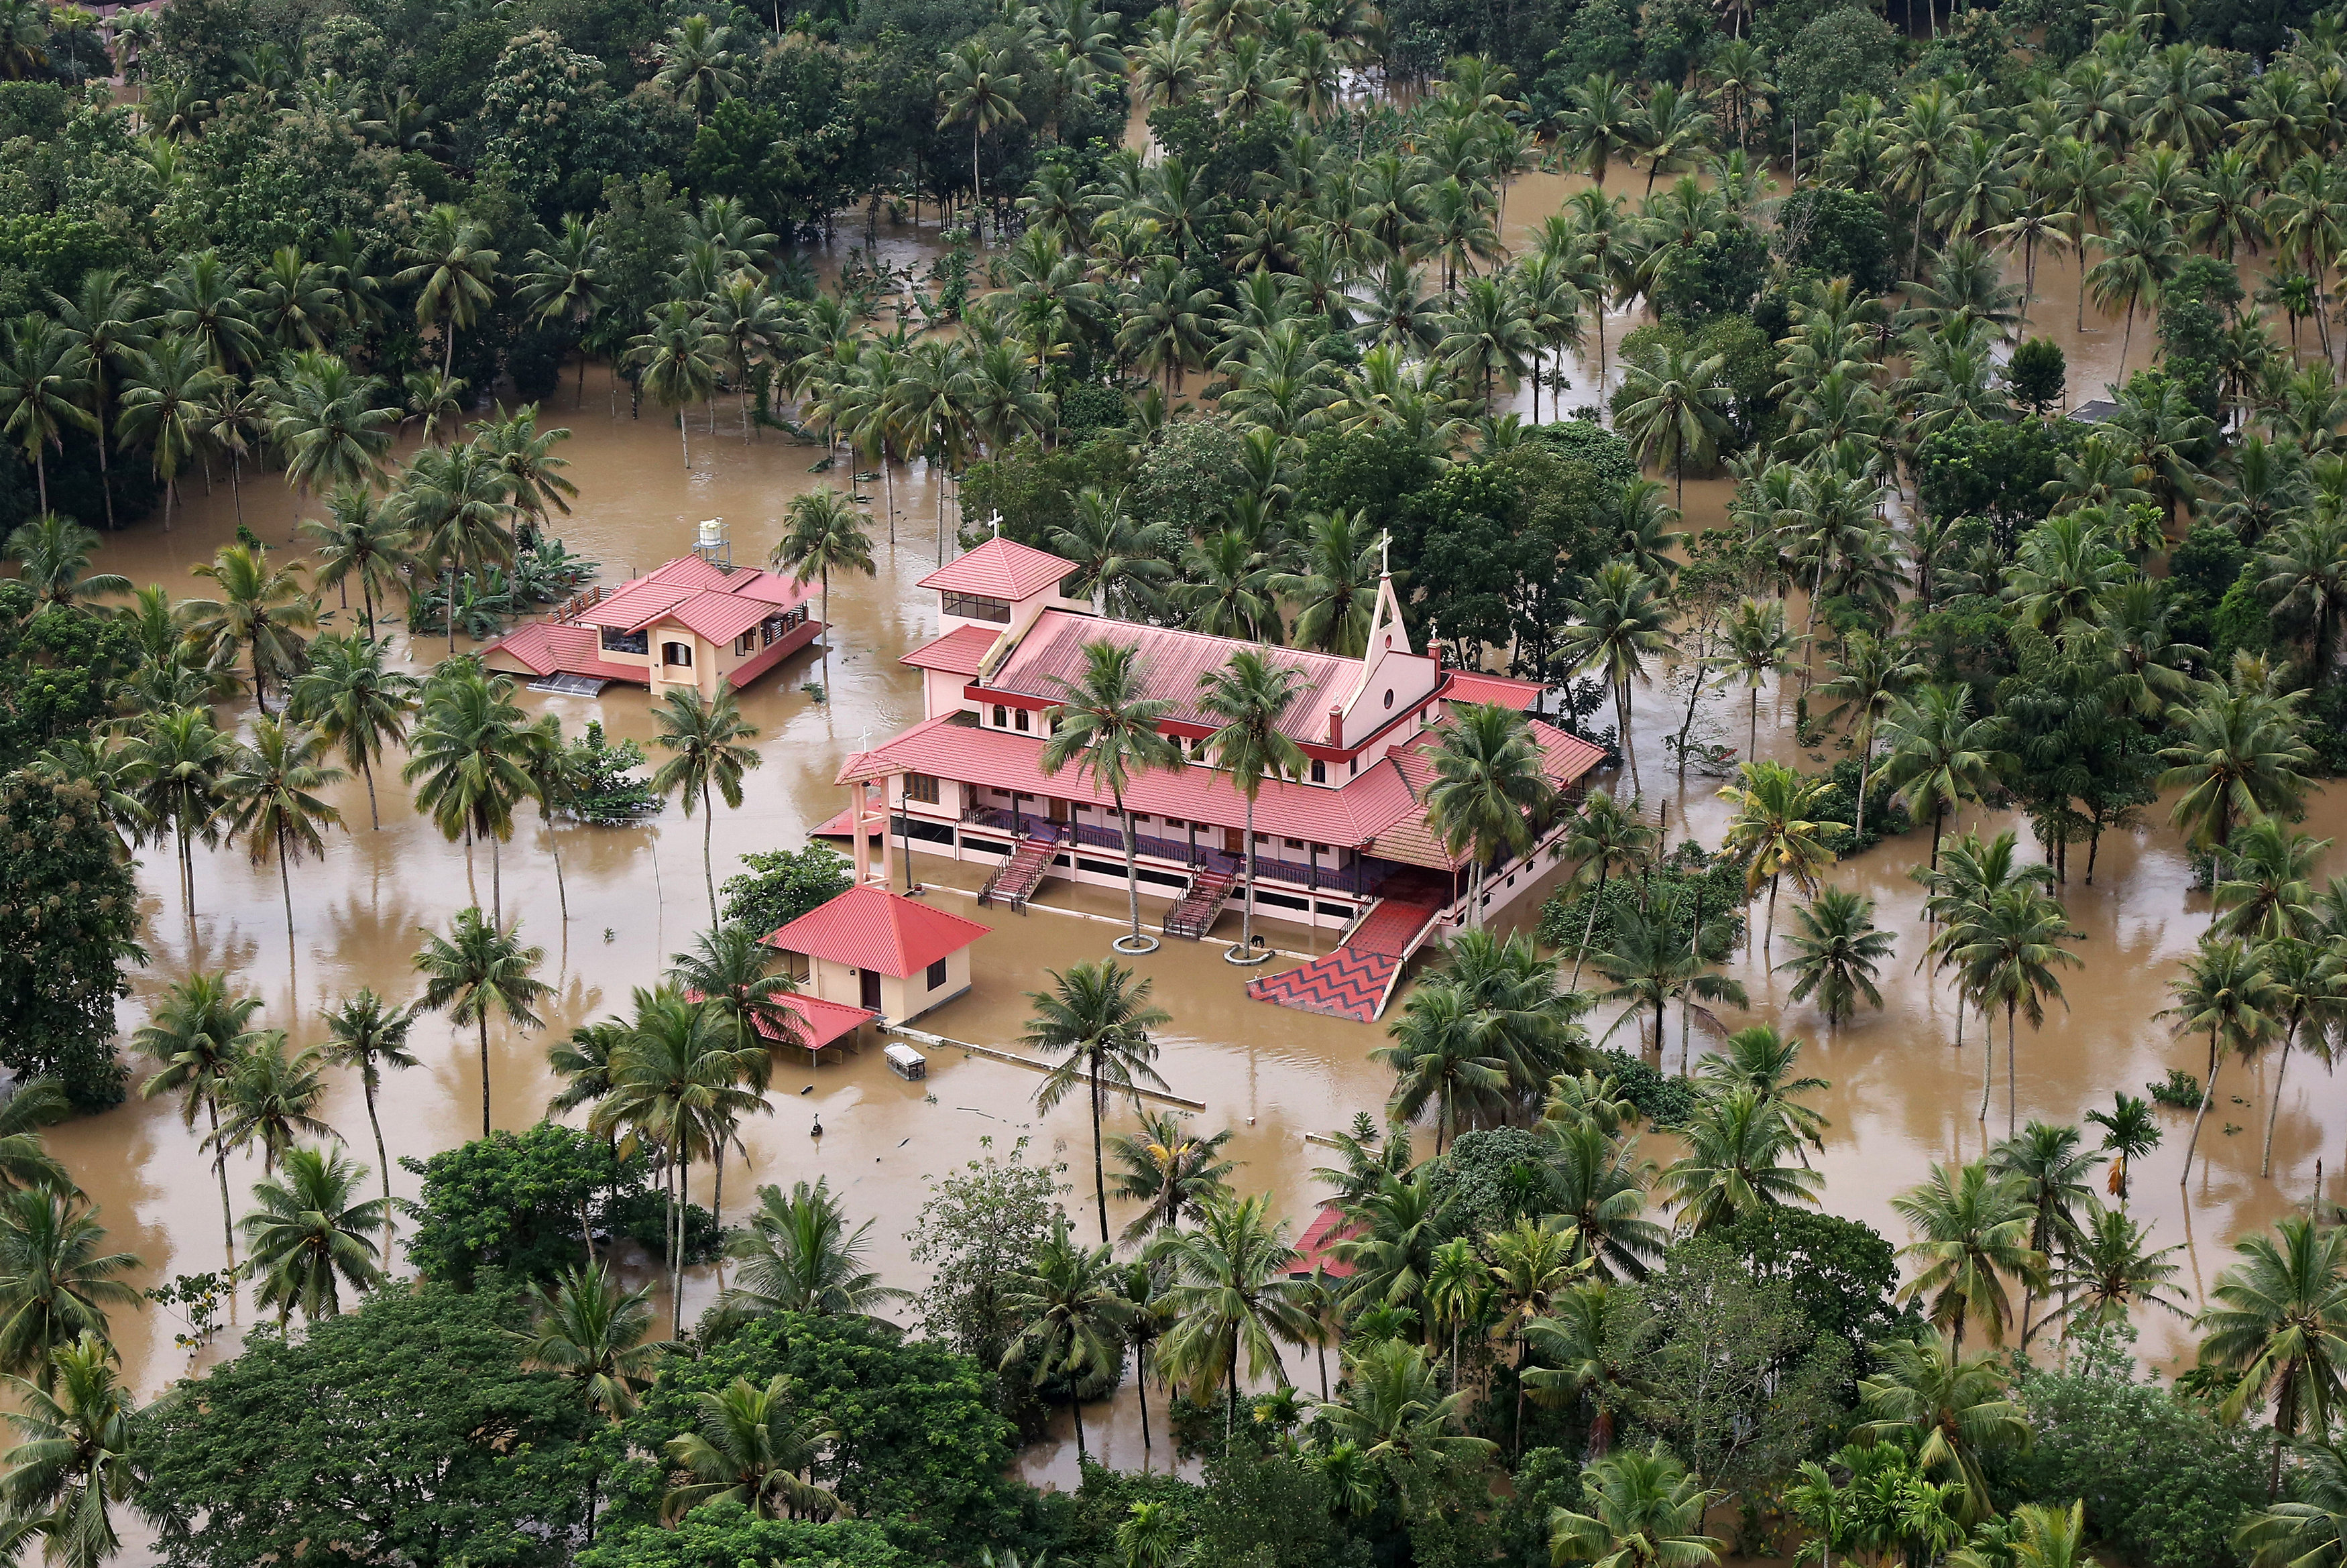 An aerial view shows partially submerged houses at a flooded area in the southern state of Kerala, India, August 17, 2018. REUTERS